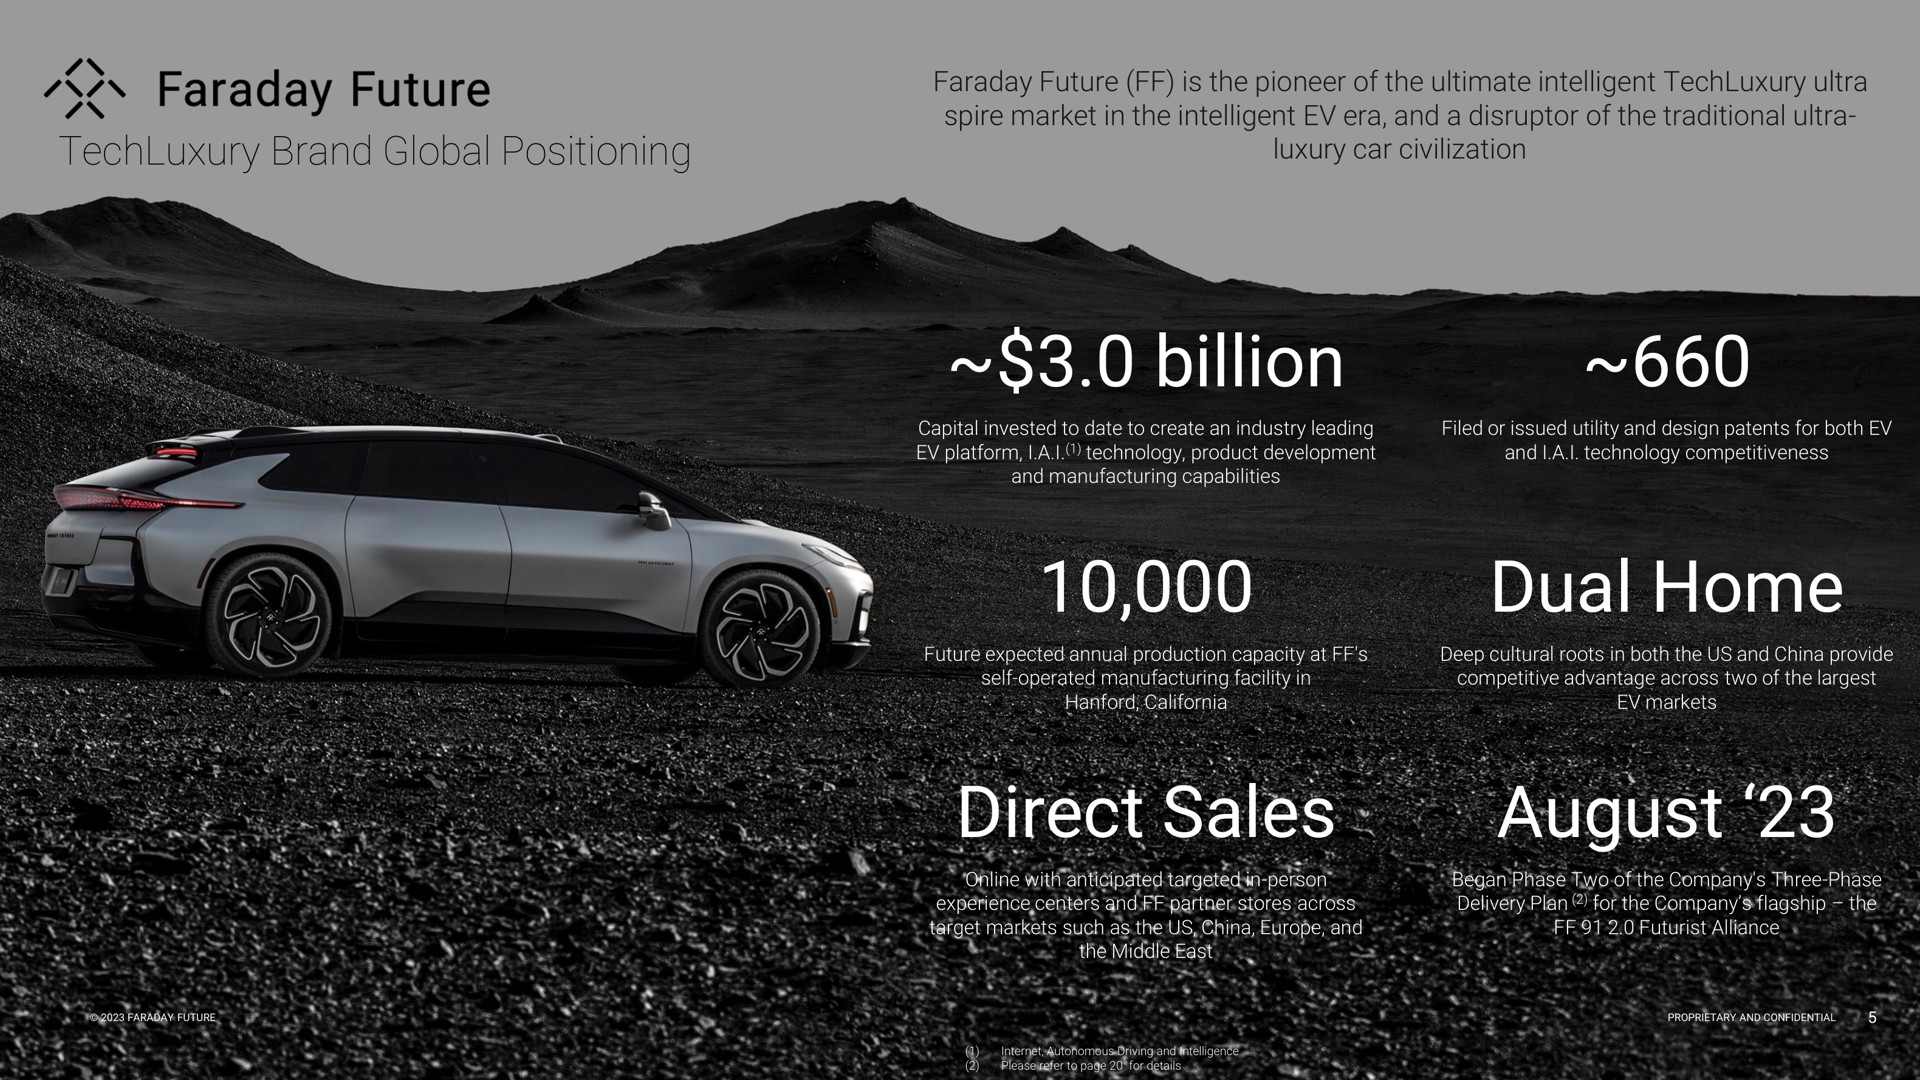 brand global positioning faraday future is the pioneer of the ultimate intelligent ultra spire market in the intelligent era and a disruptor of the traditional ultra luxury car civilization billion dual home direct sales august aday soe | Faraday Future